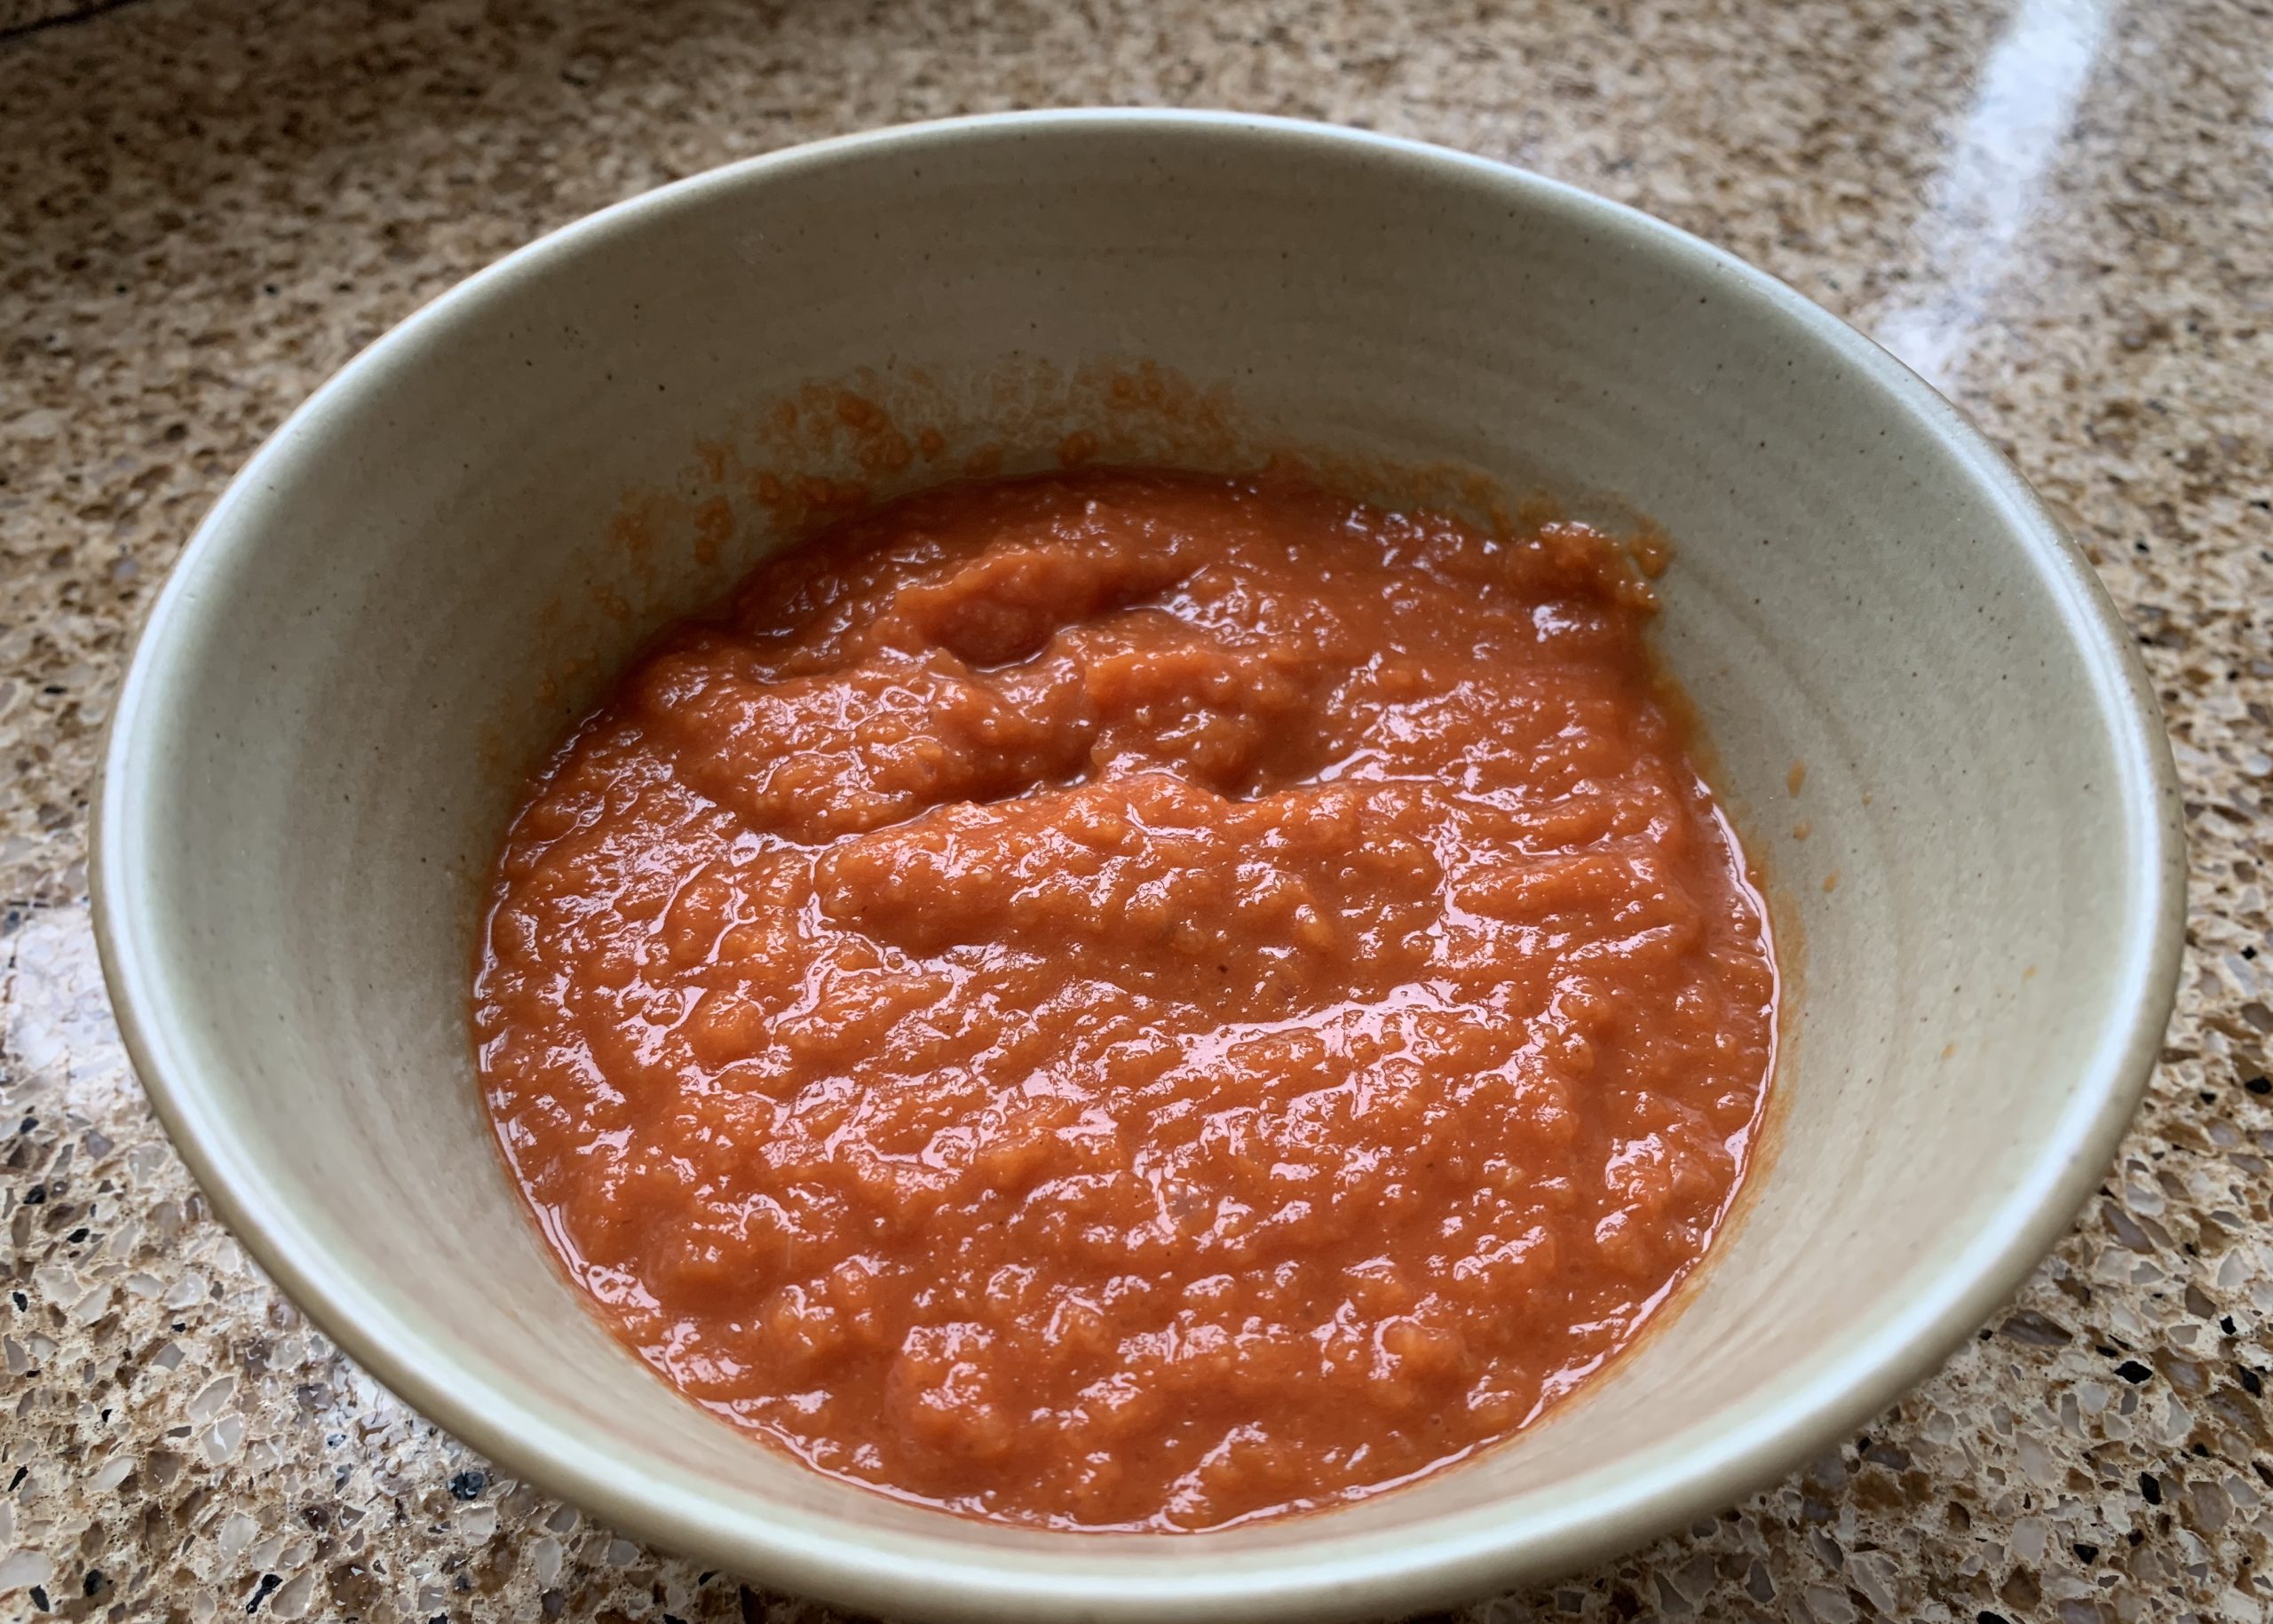 Tomato sauce in a bowl for gluten free pizza